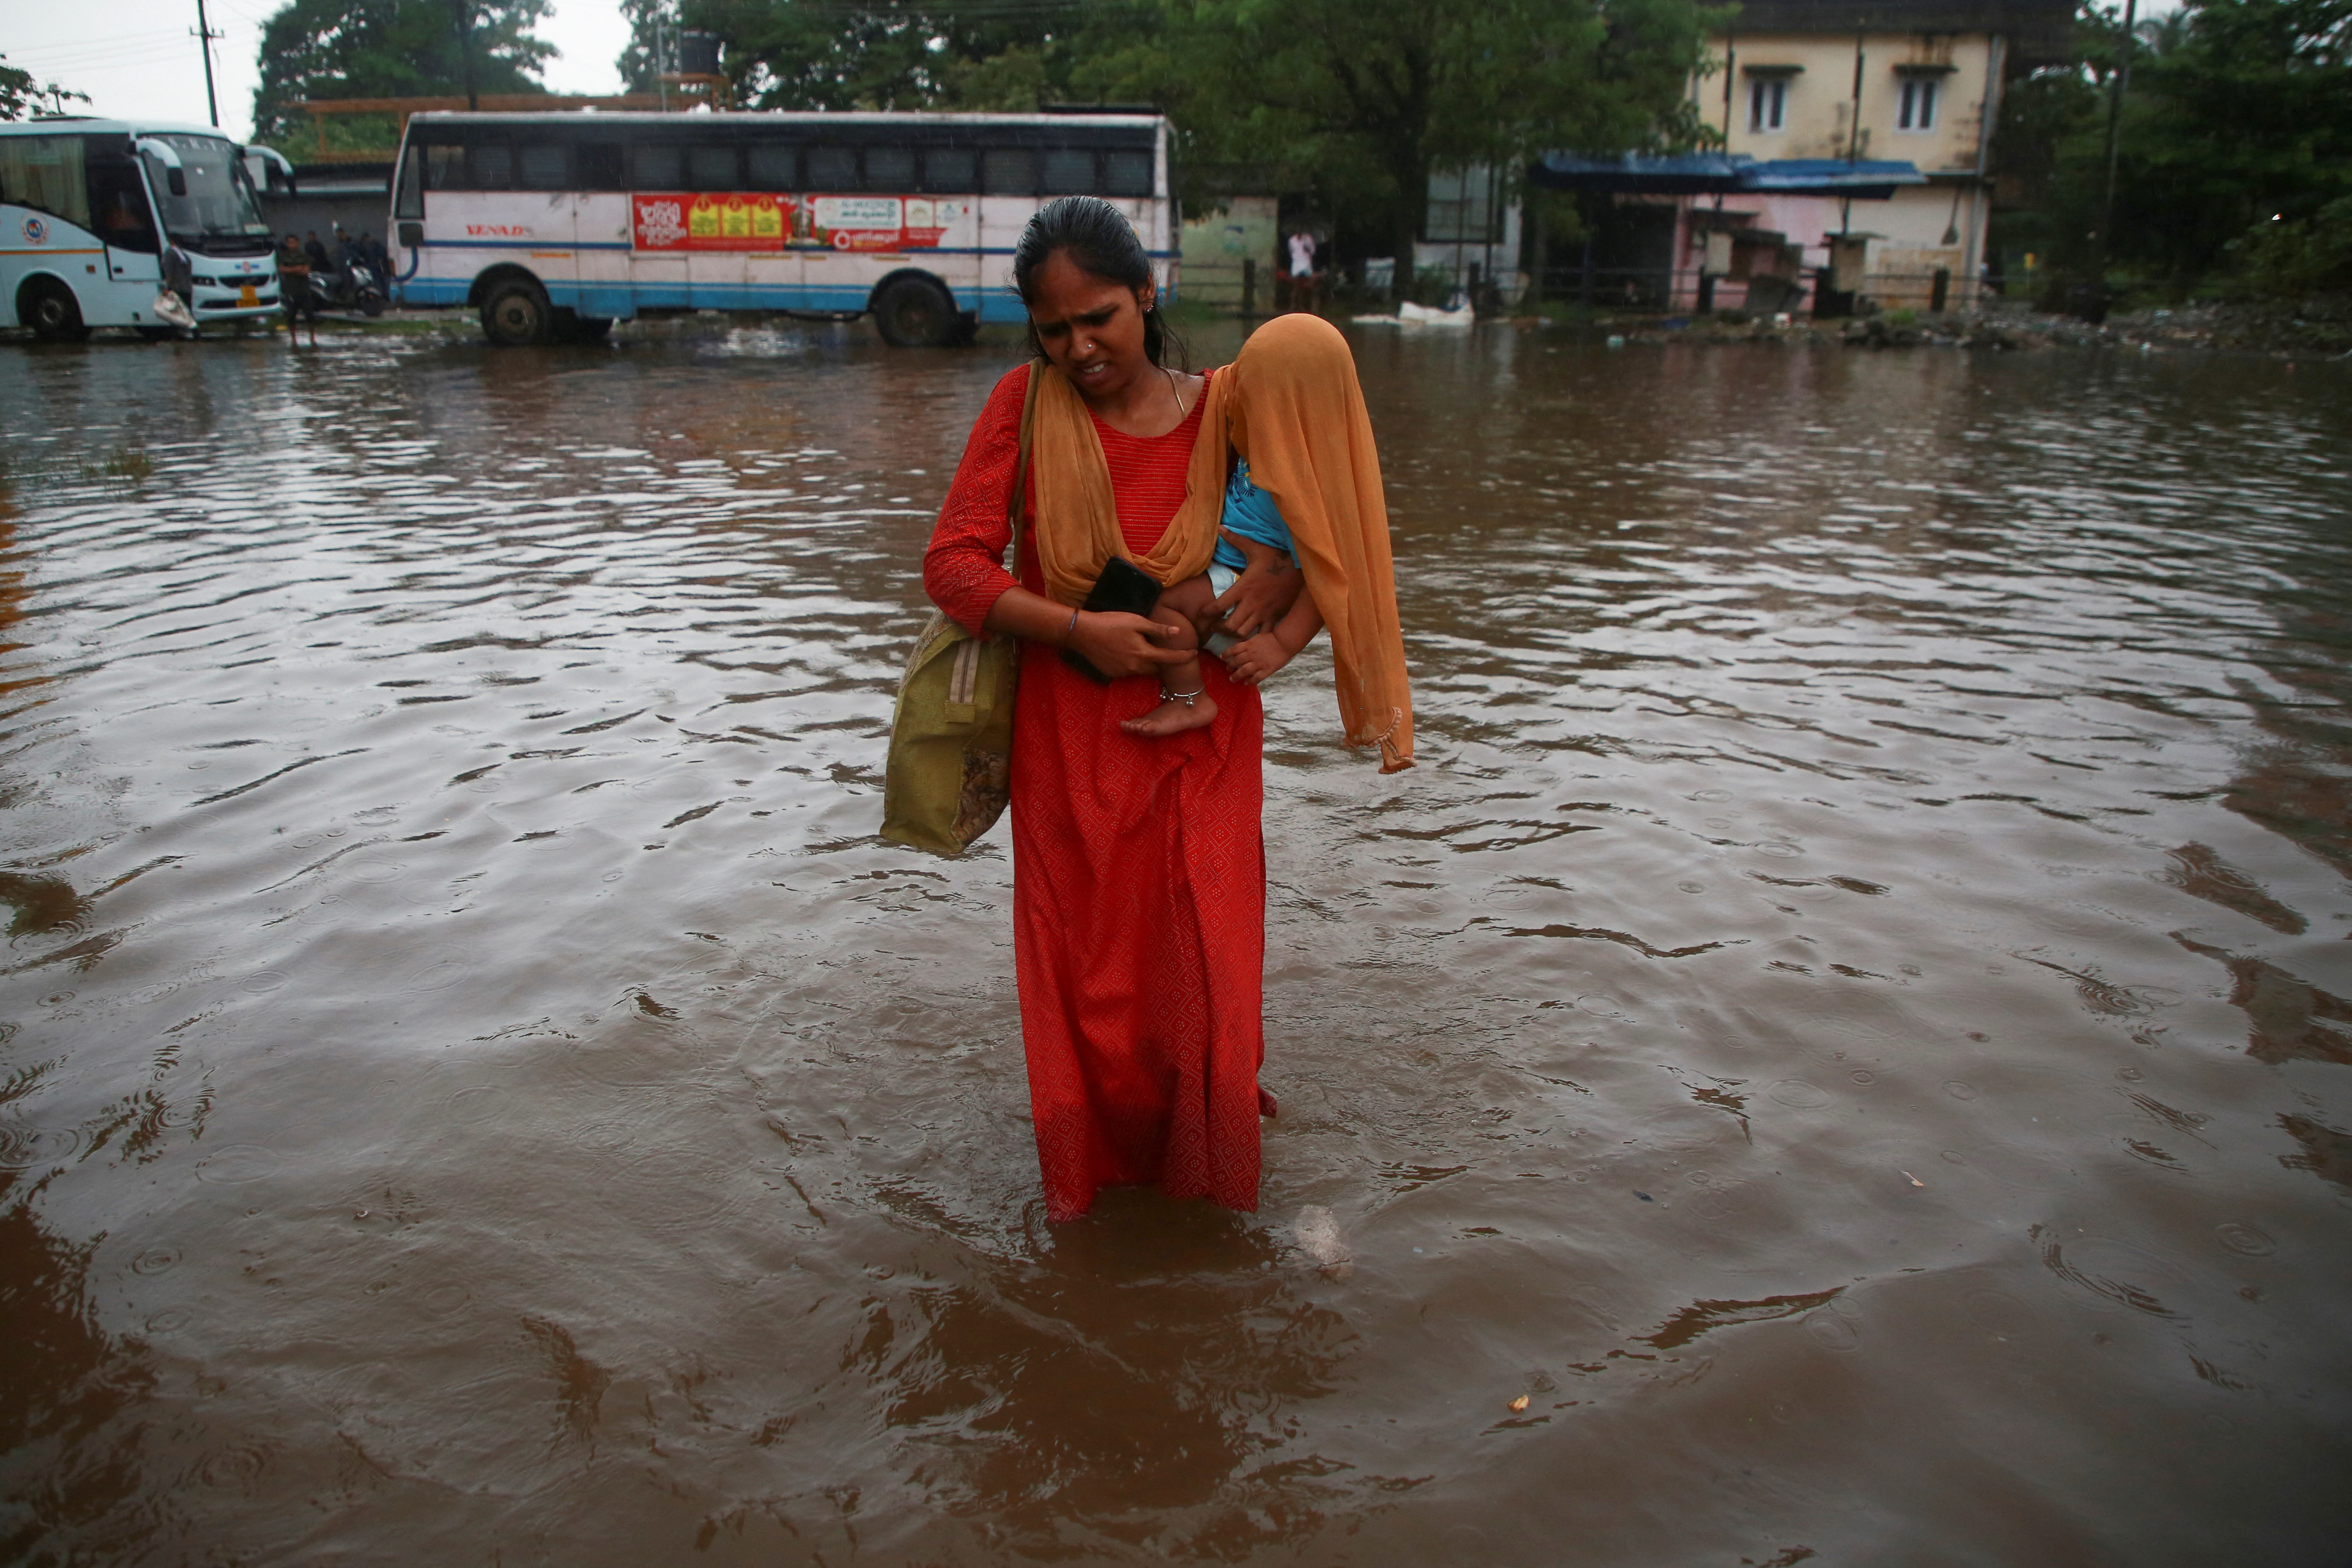 A woman carries her son, covered with a scarf, through a water-logged bus terminal as it rains in Kochi